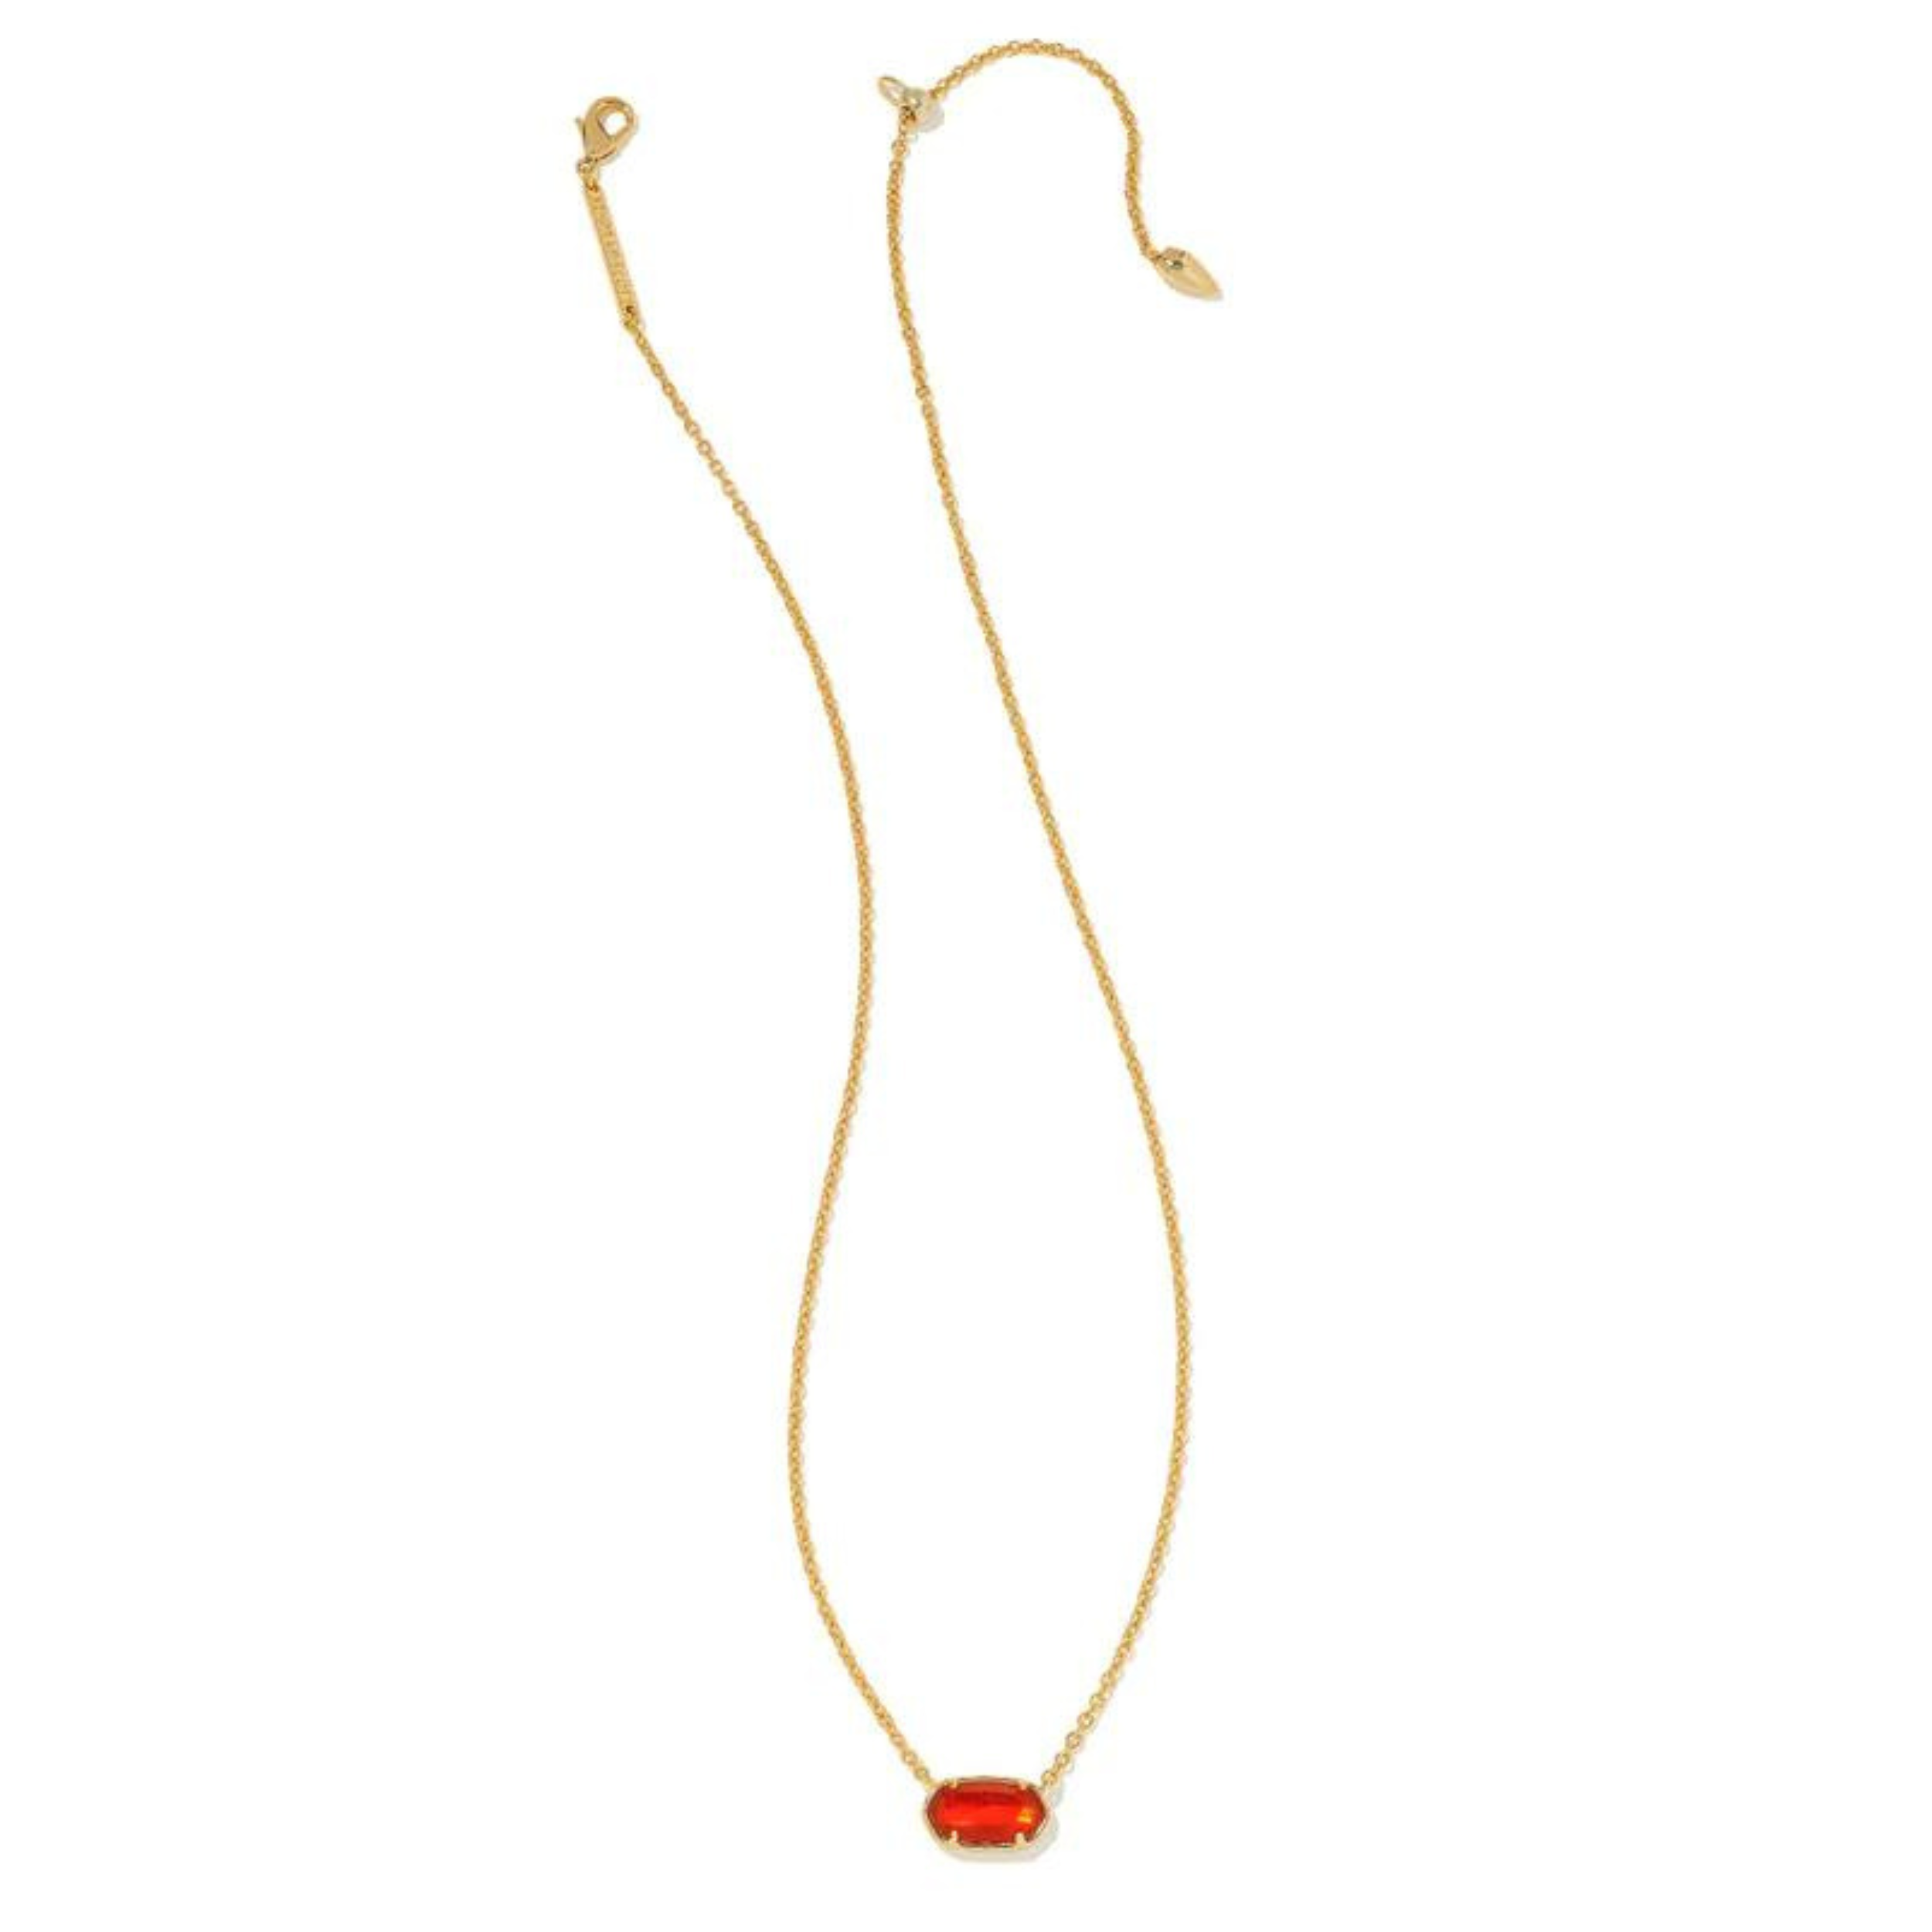 Kendra Scott Elisa Silver Pendant Necklace in Bright Red Opaque Glass |  4217701053 | Borsheims